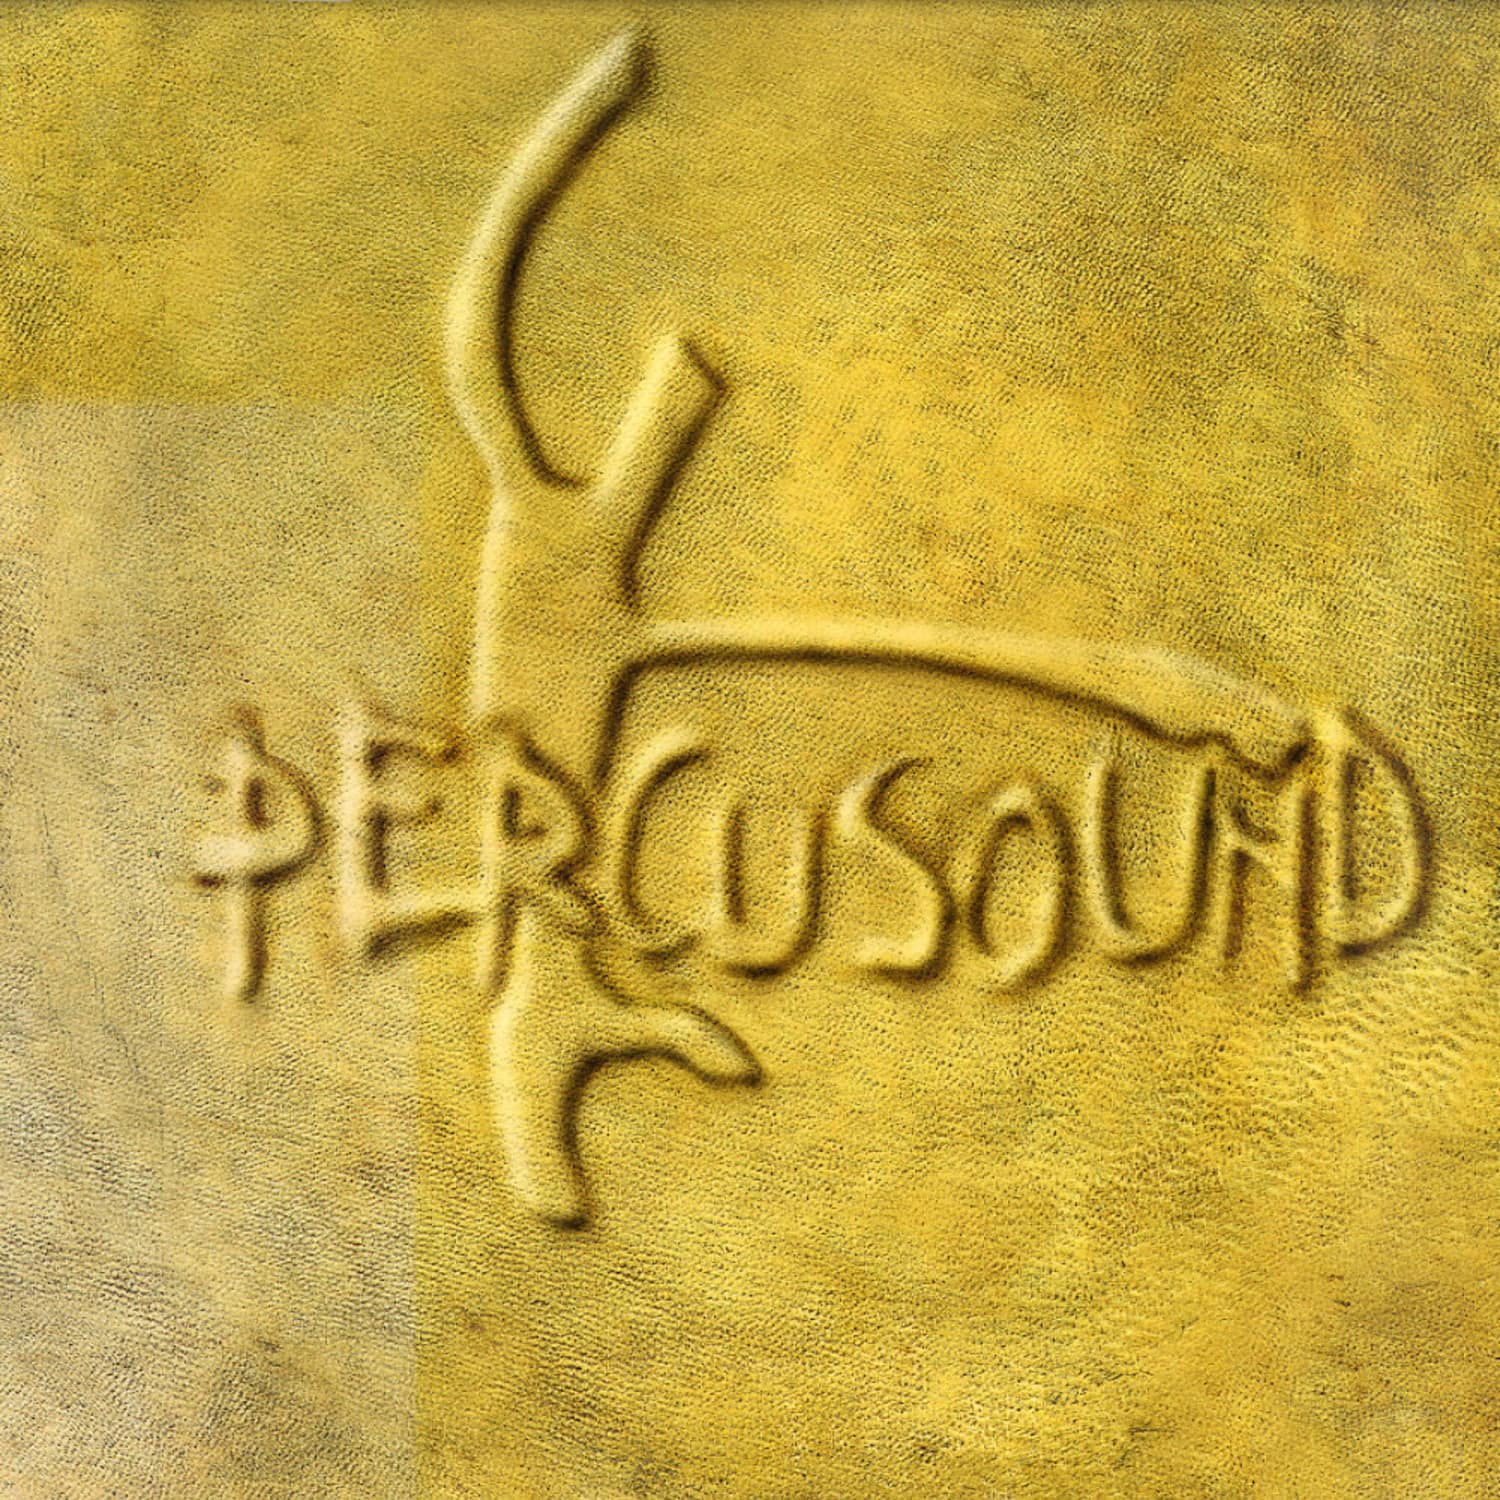 Percusound - ECHOES OF SKINS AND WOOD